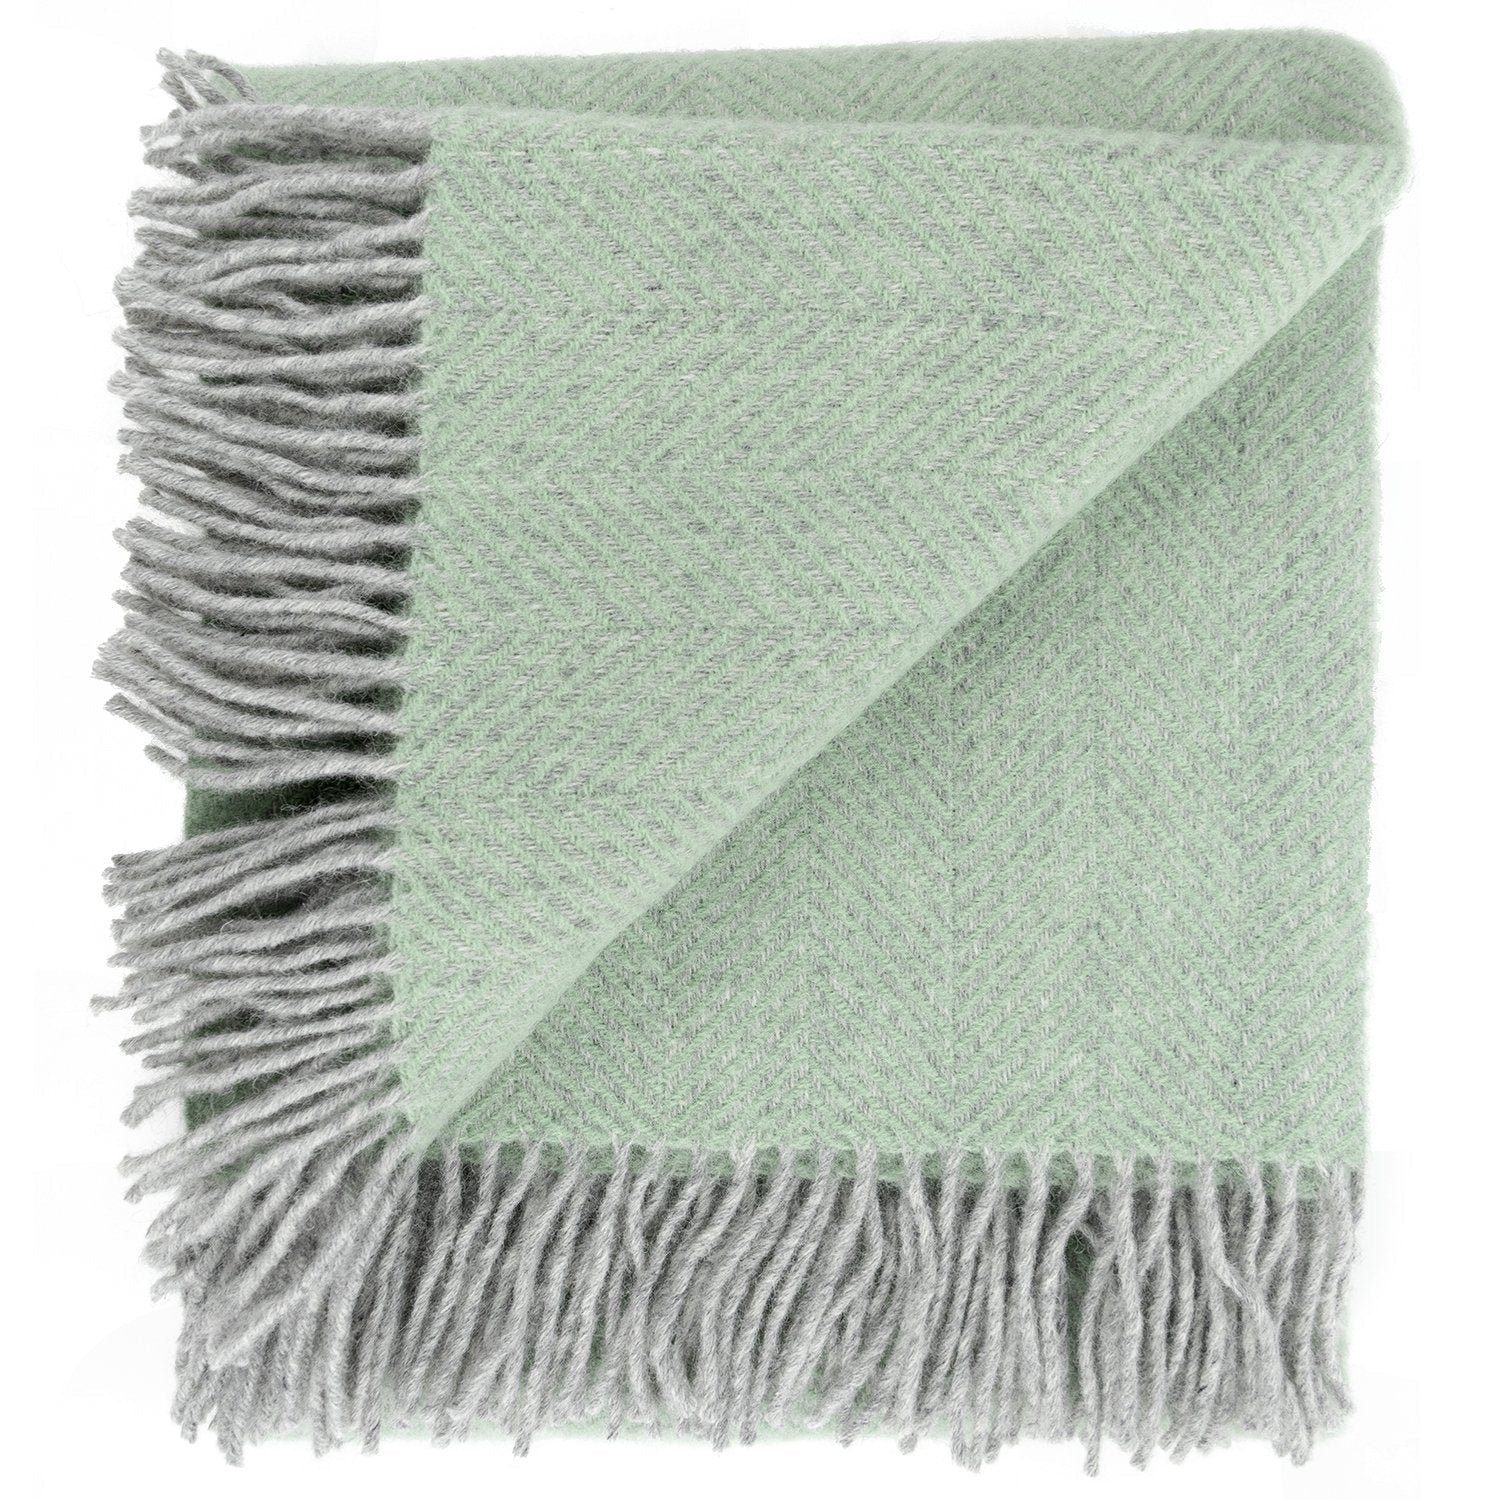 Highland Tweed Herringbone Pure New Wool Throw ~ Basil ~-Throws and Blankets-Prince of Scots-00810032750015-K4050030-028-Prince of Scots